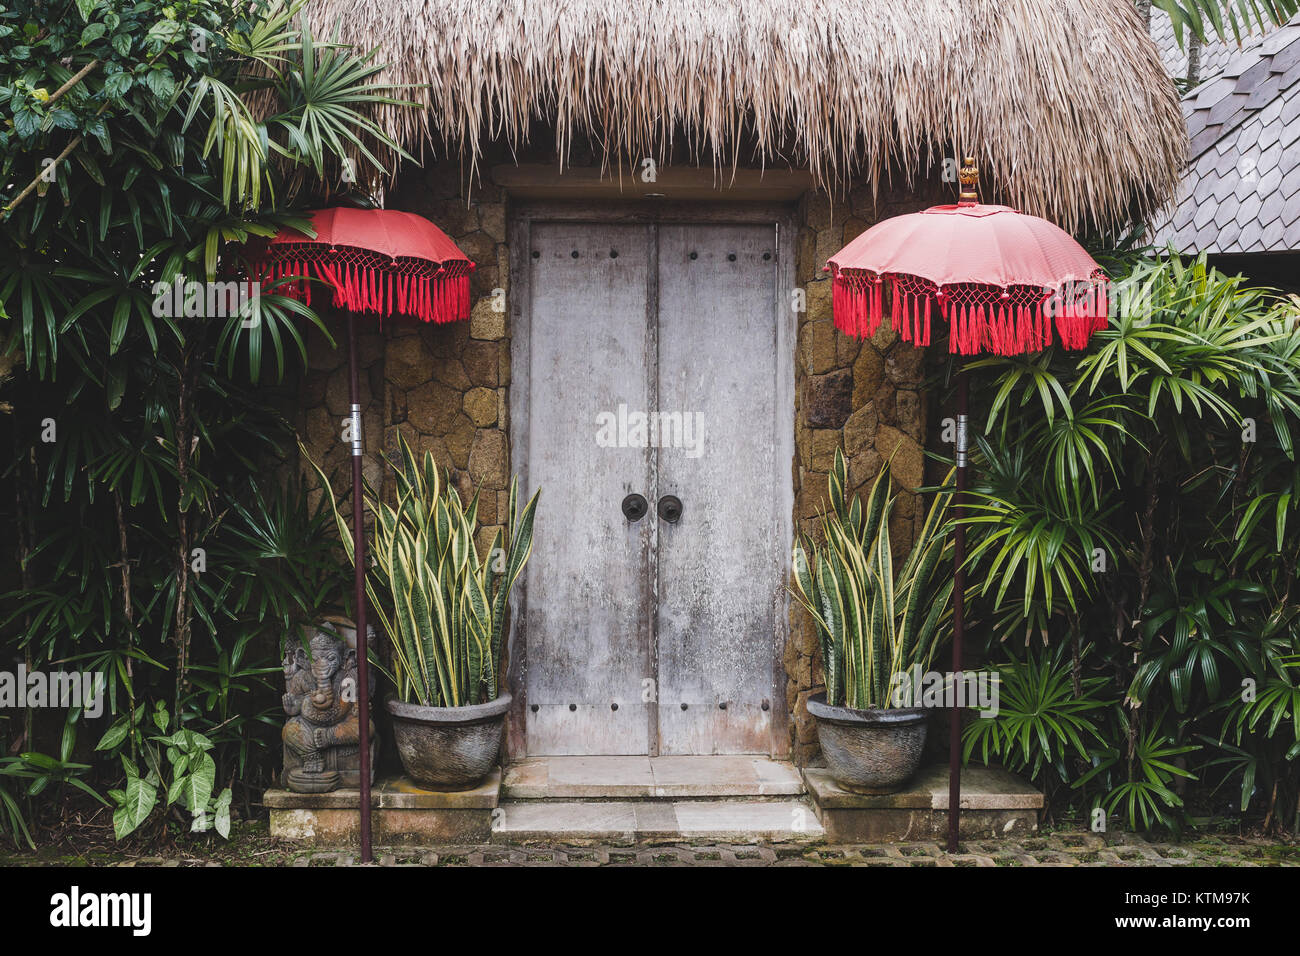 Entrance in traditional bali house with wooden door, straw roof and red umbrellas Stock Photo